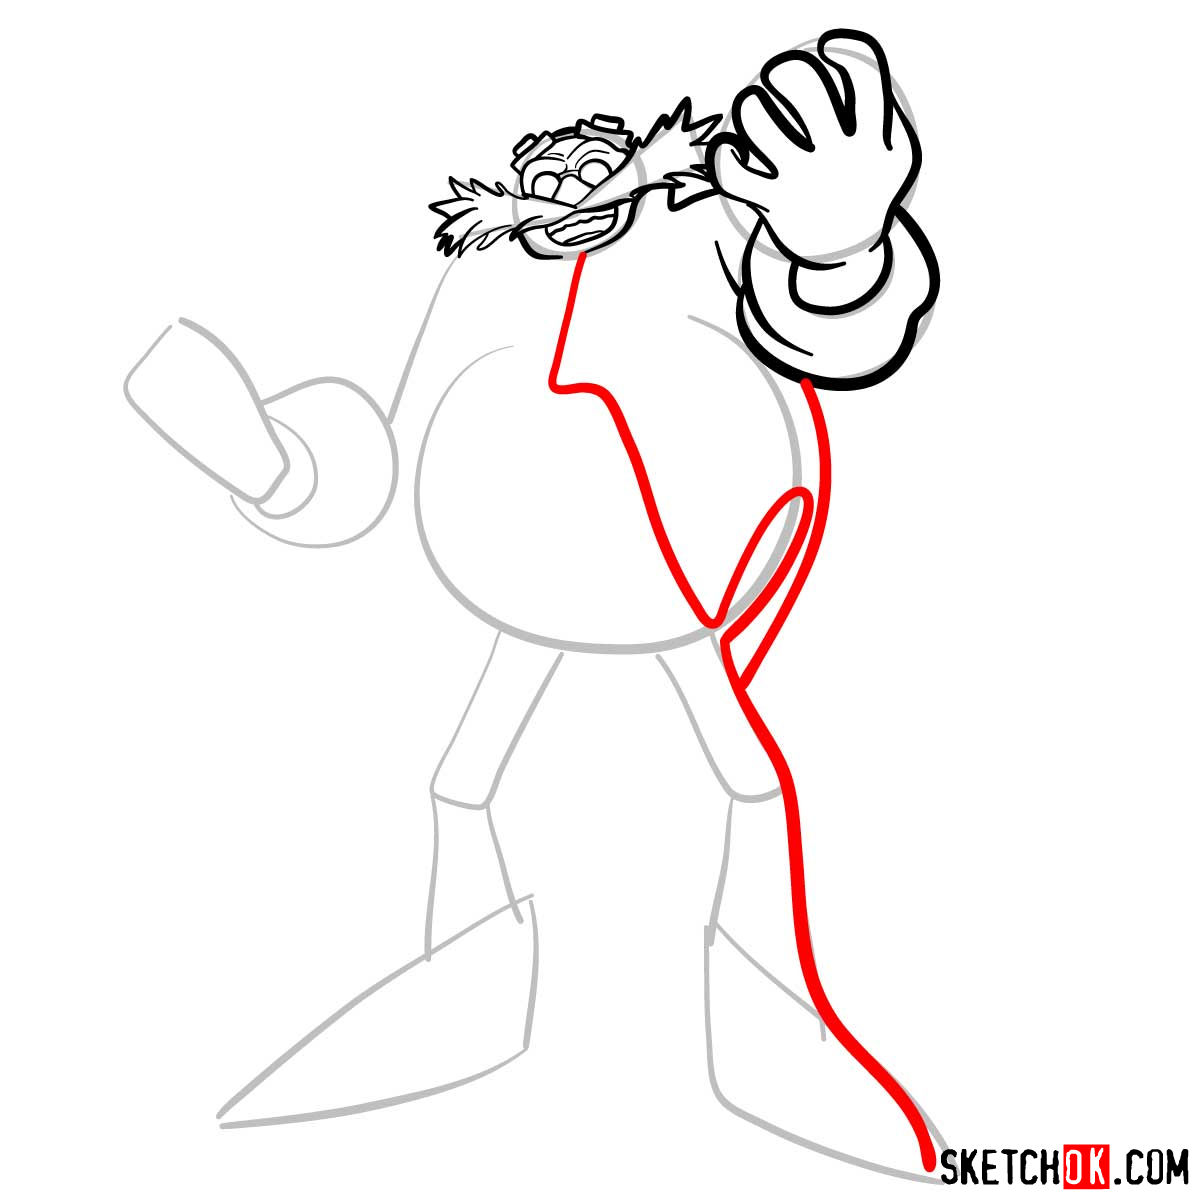 How to draw Dr. Robotnik (Eggman) from Sonic the Hedgehog - step 08